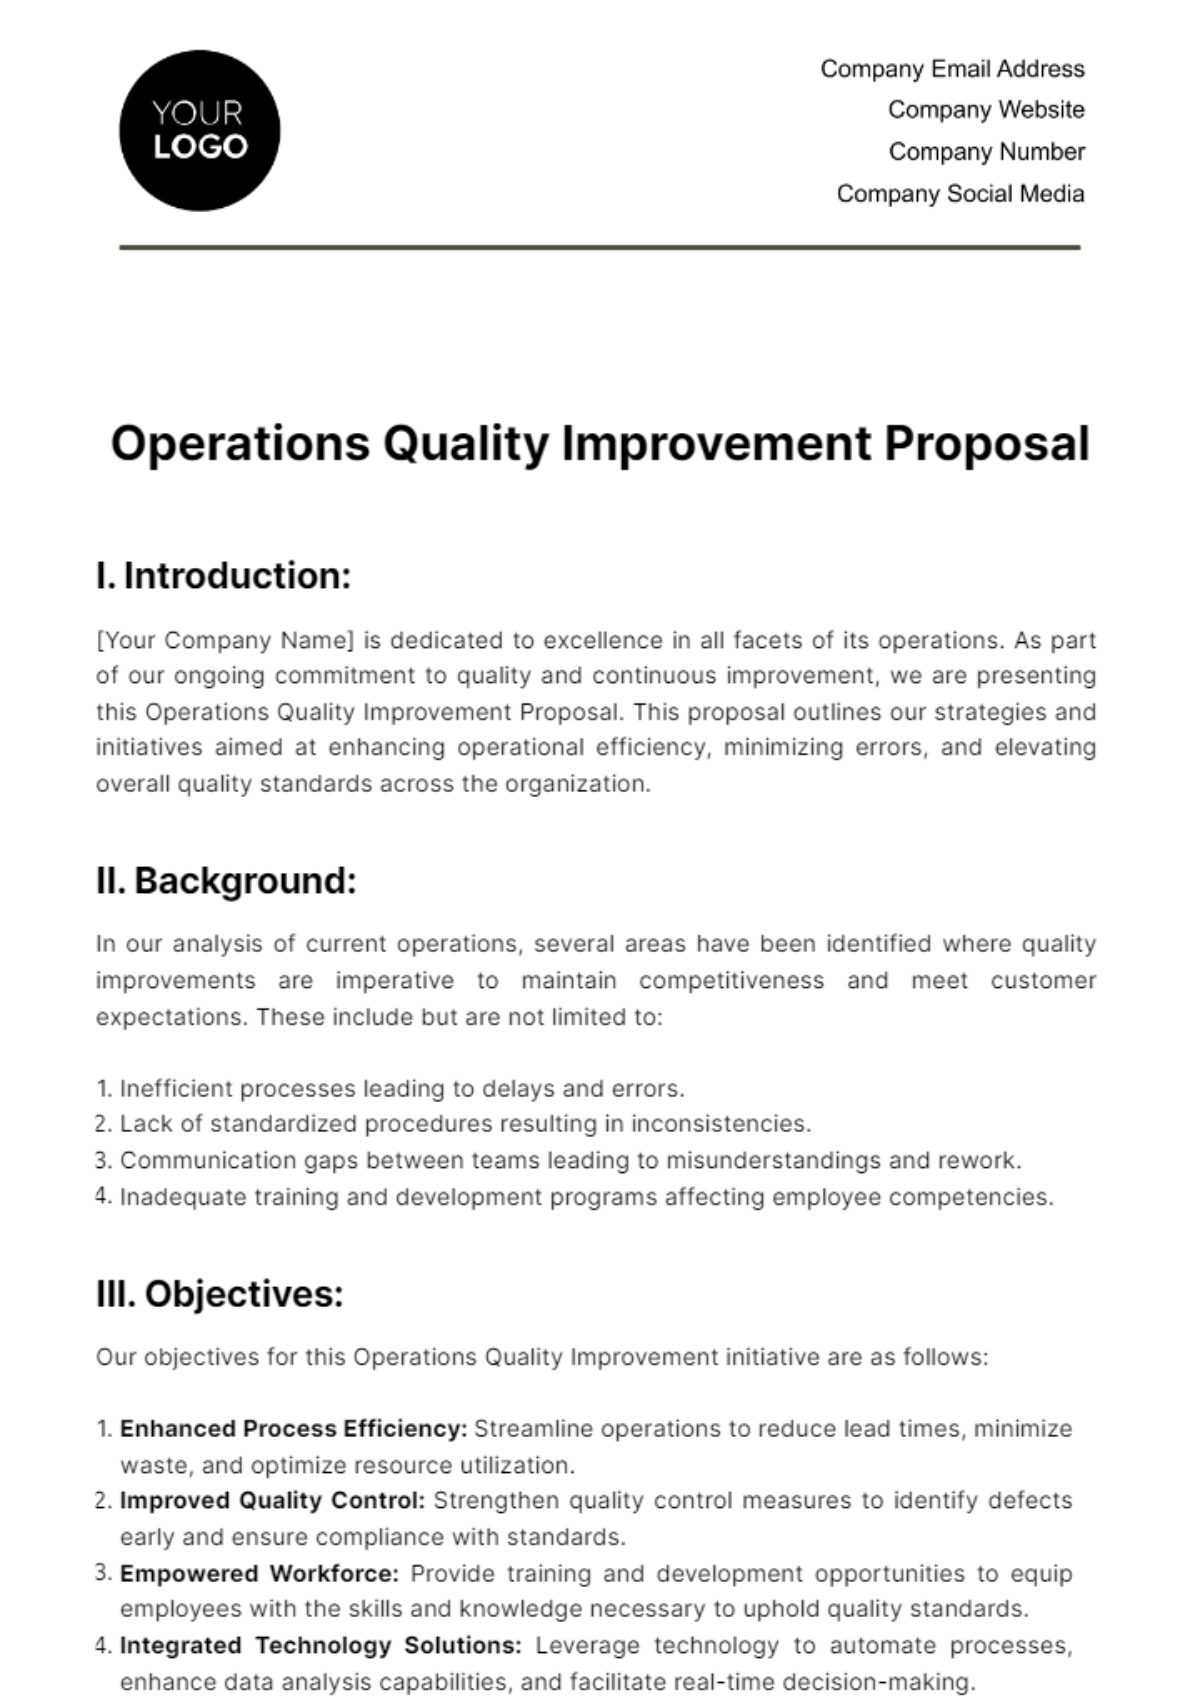 Free Operations Quality Improvement Proposal Template